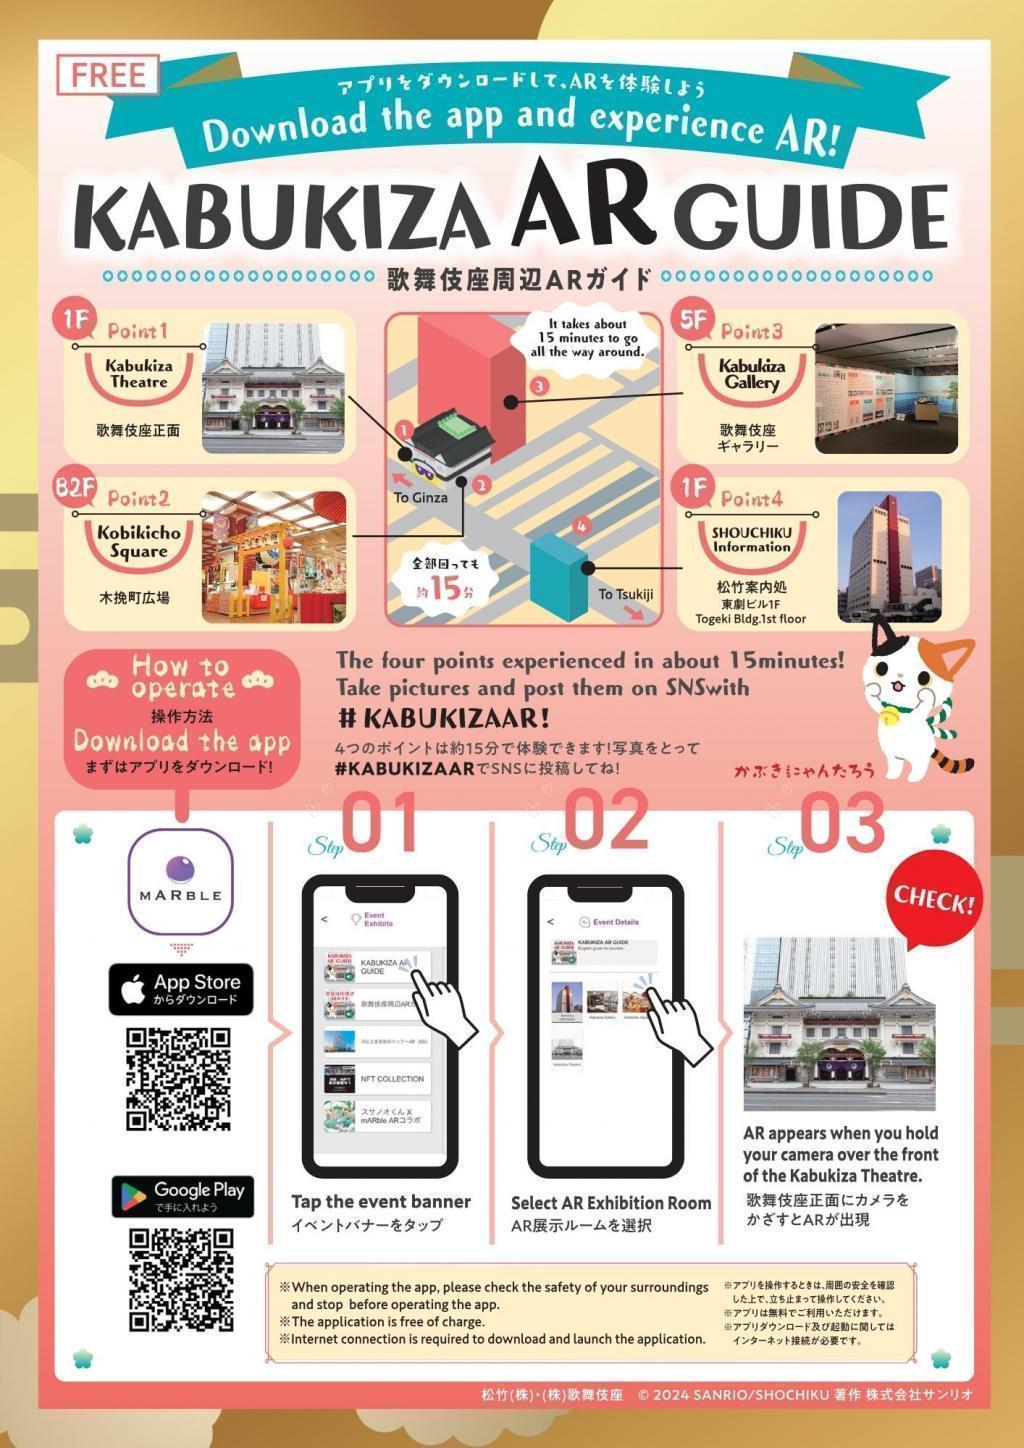  Let's go to the Kabukiza Theatre with AR!